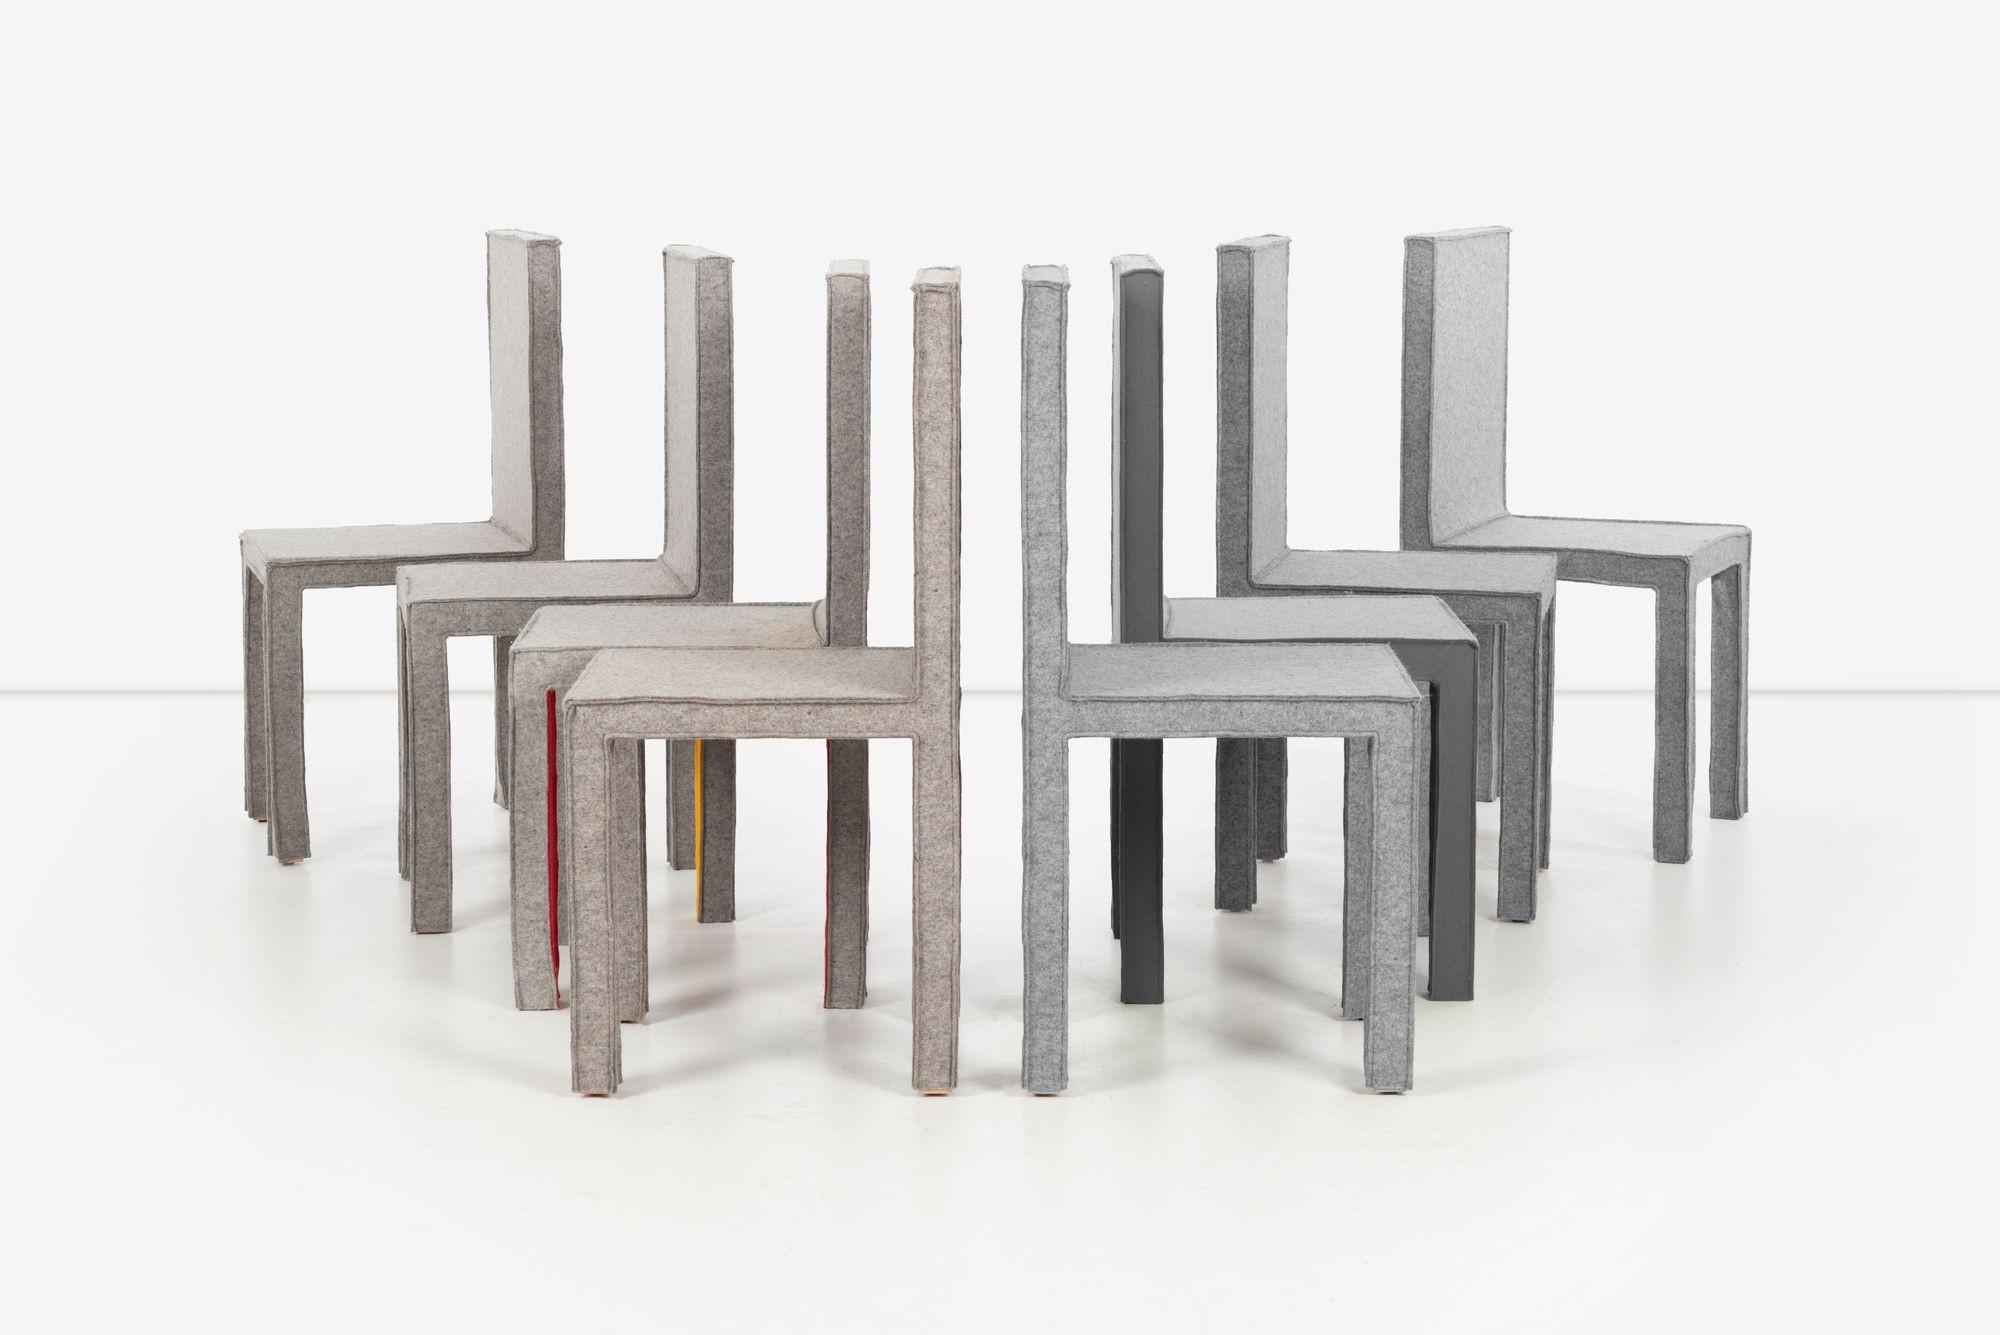 Reed and Delphine Krakoff Rkdk Dining Chairs, Set of Eight For Sale 5